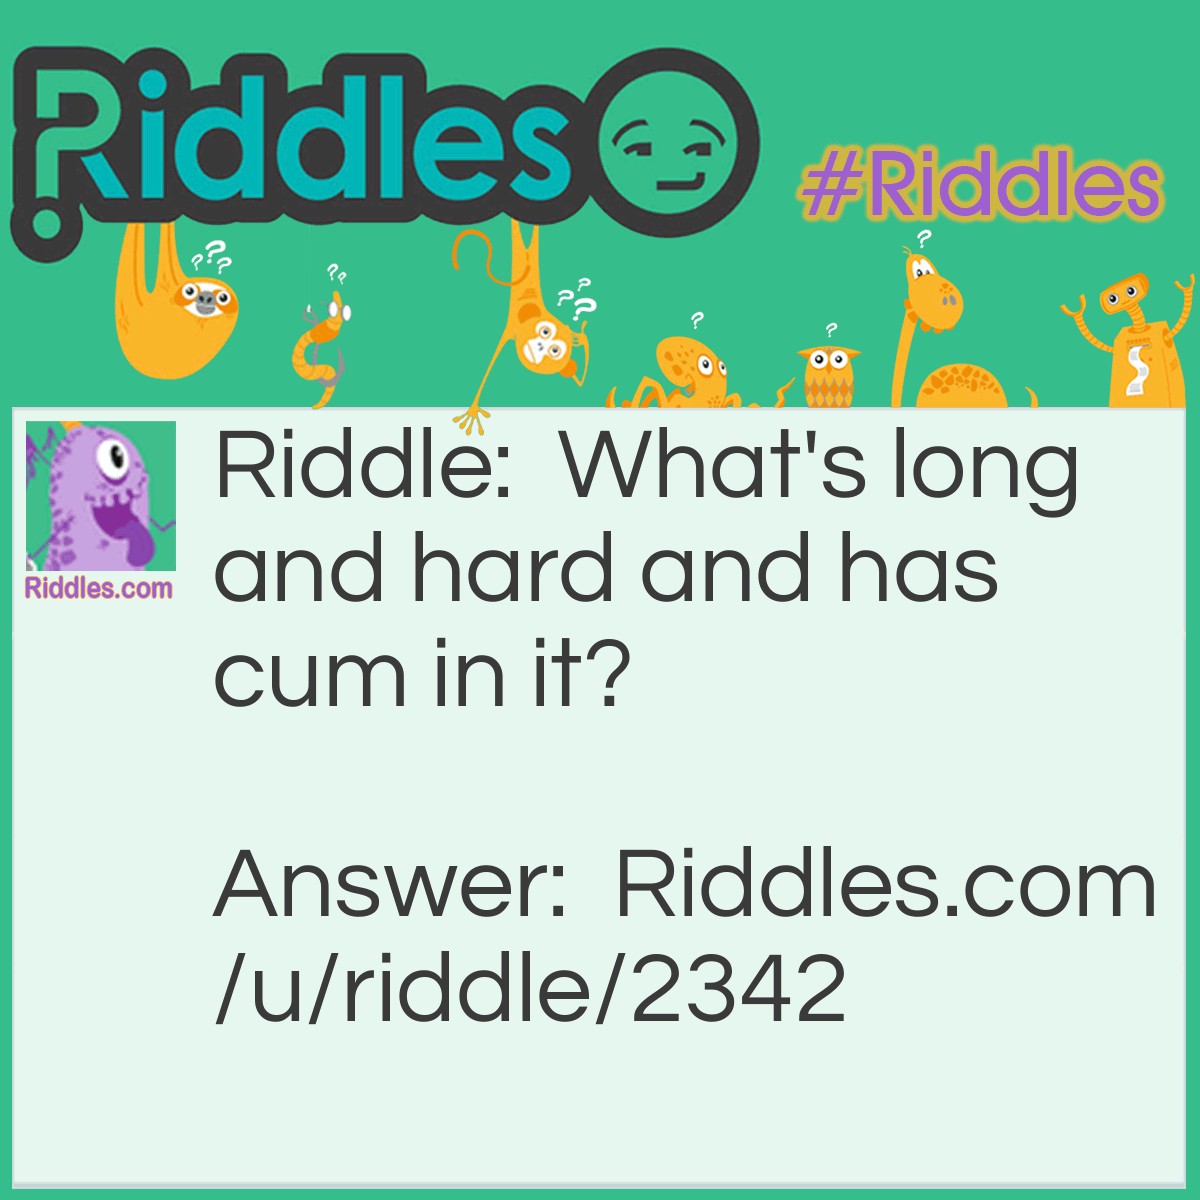 Riddle: What's long and hard and has cum in it? Answer: A cucumber!